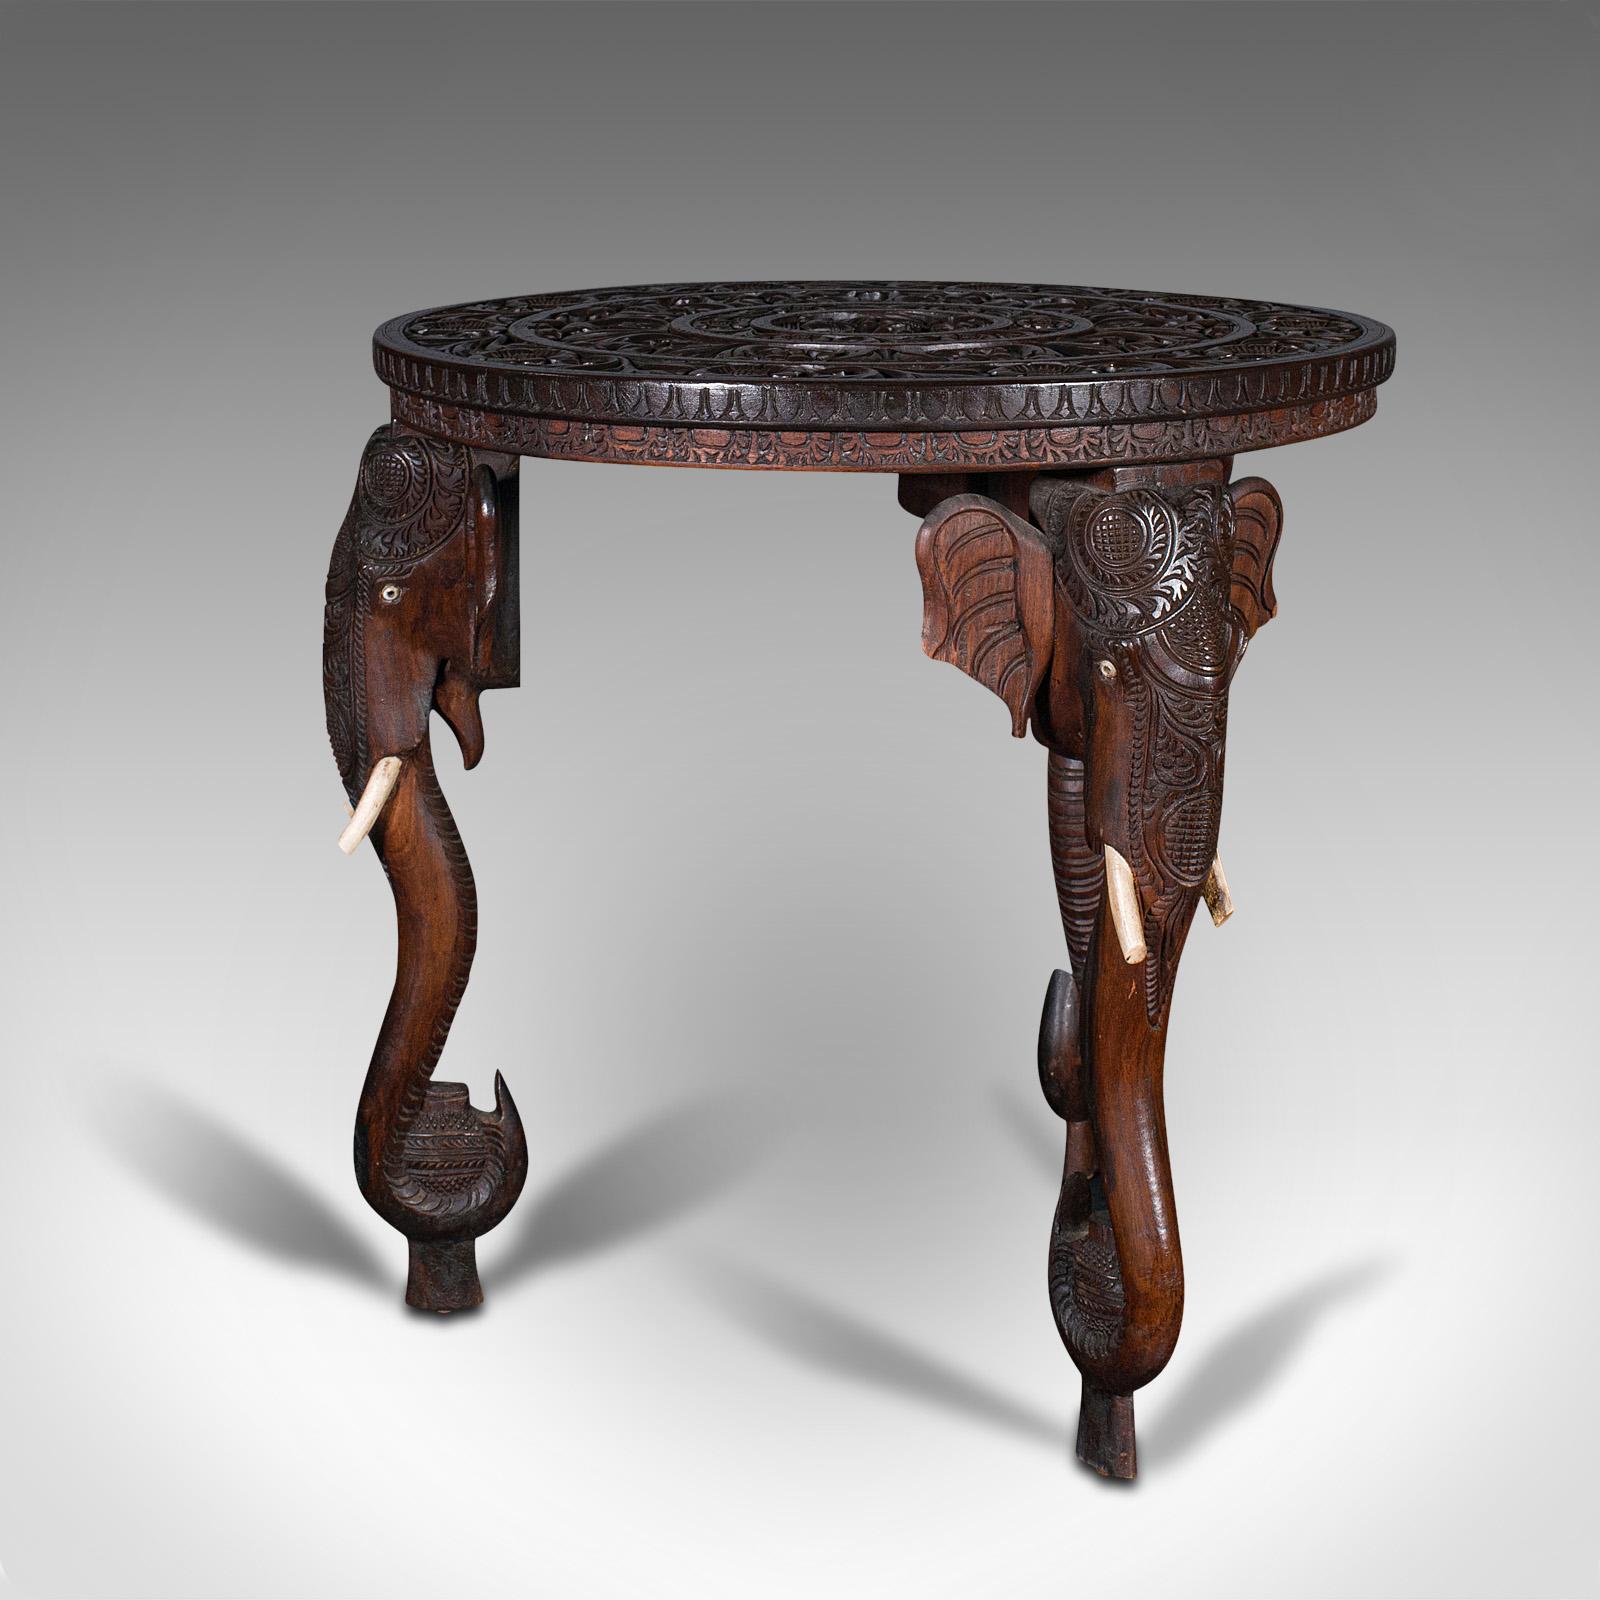 19th Century Antique Carved Circular Table, Indian, Teak, Colonial, Campaign, Victorian, 1900